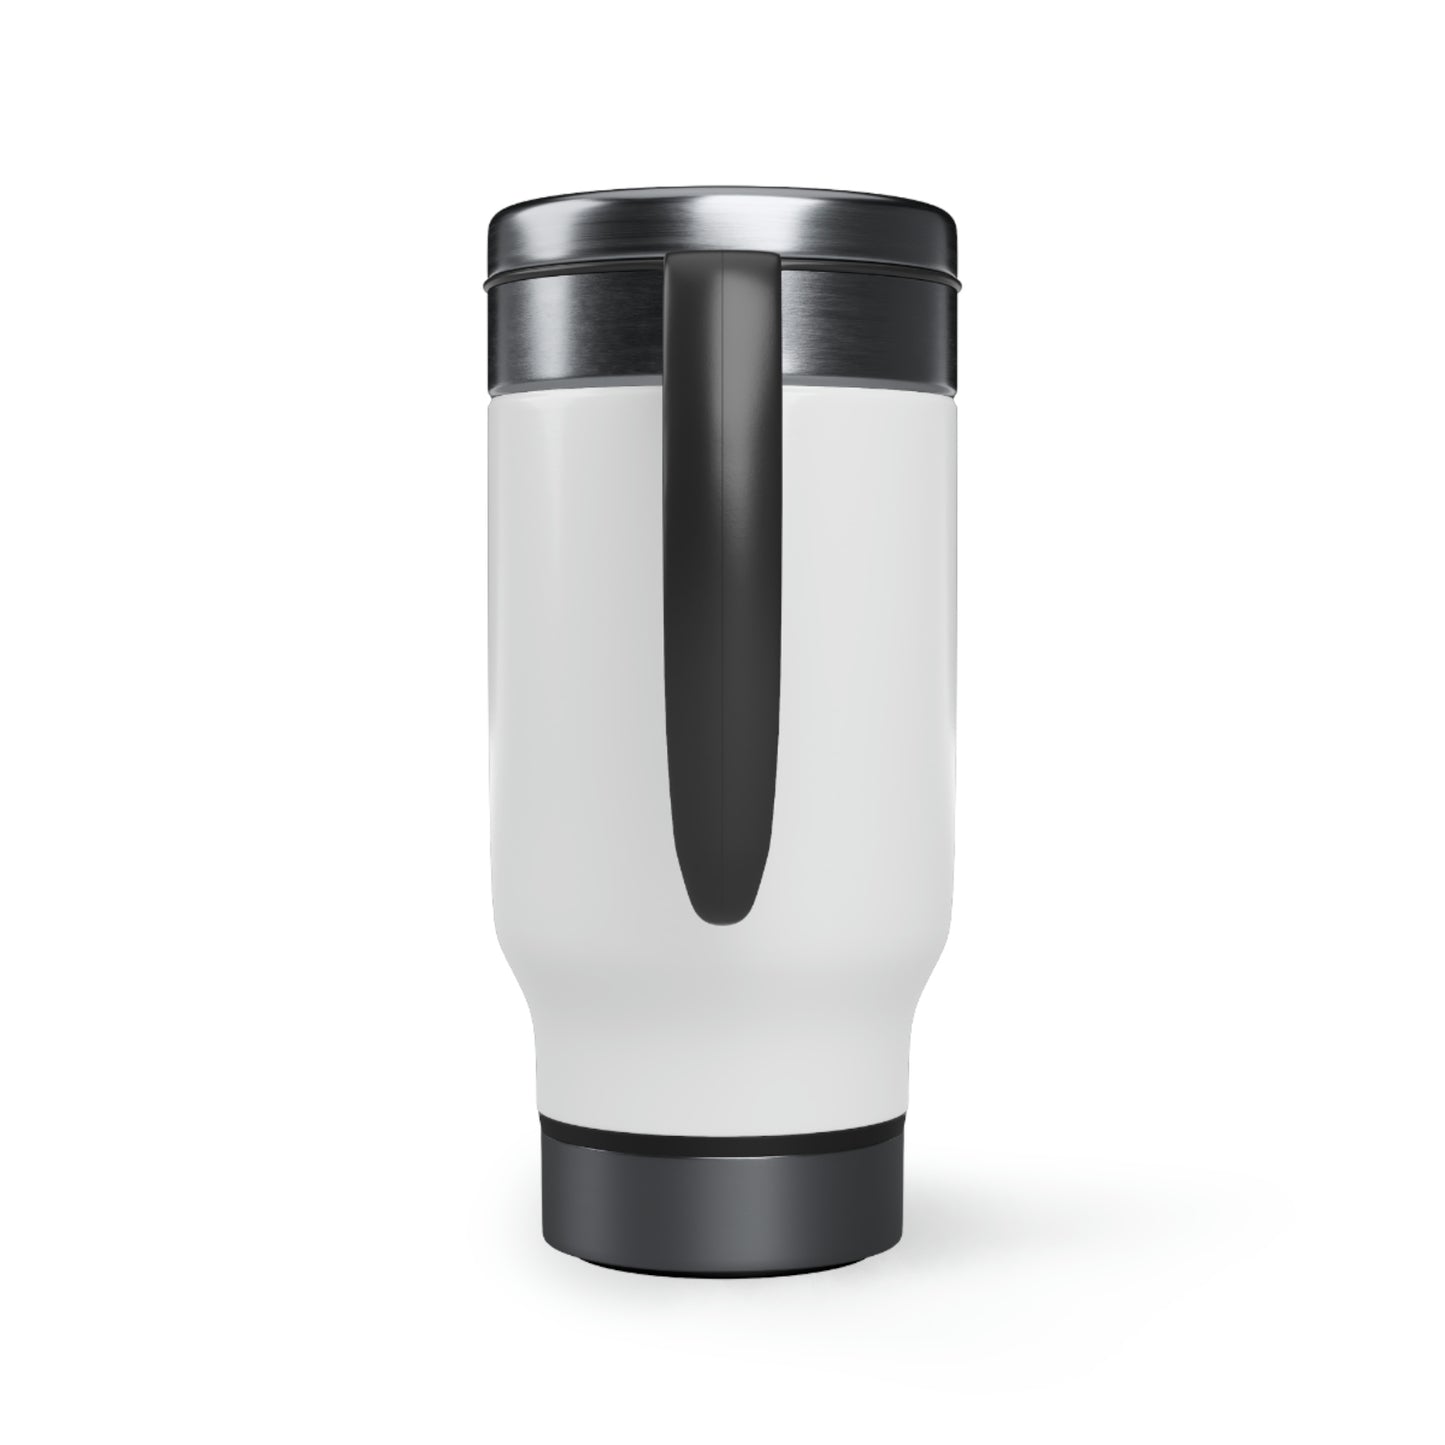 Branded Cowboy Stainless Steel Travel Mug with Handle, 14oz  #M10-02C